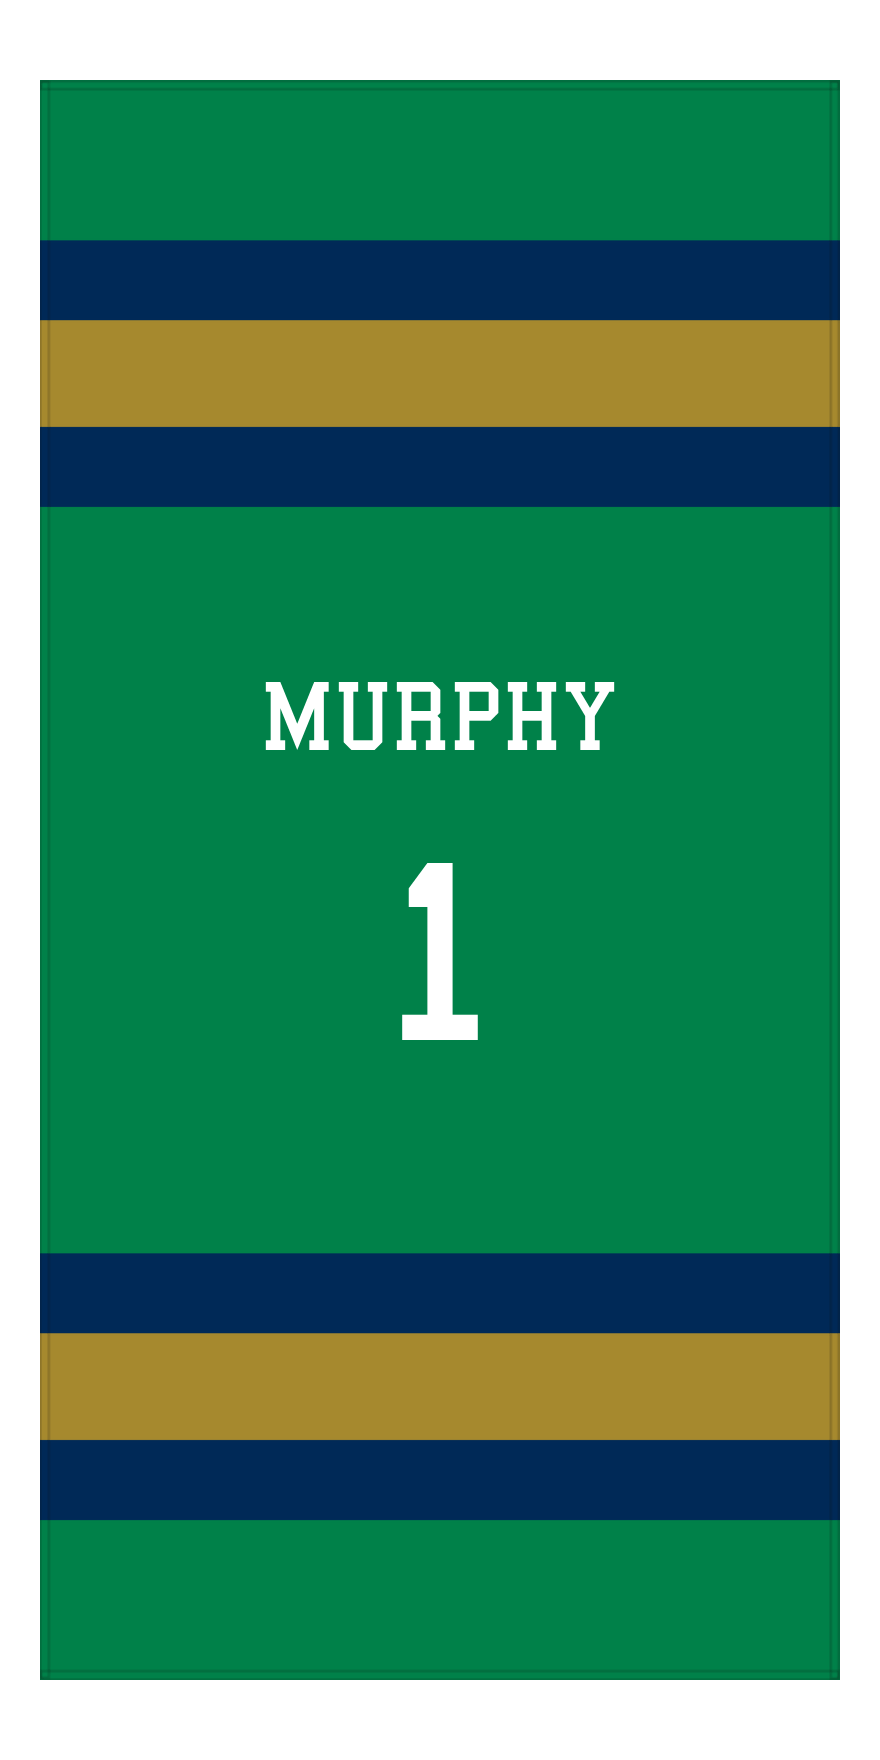 Personalized Jersey Number 1-on-1 Stripes Sports Beach Towel - Green and Gold - Vertical Design - Front View